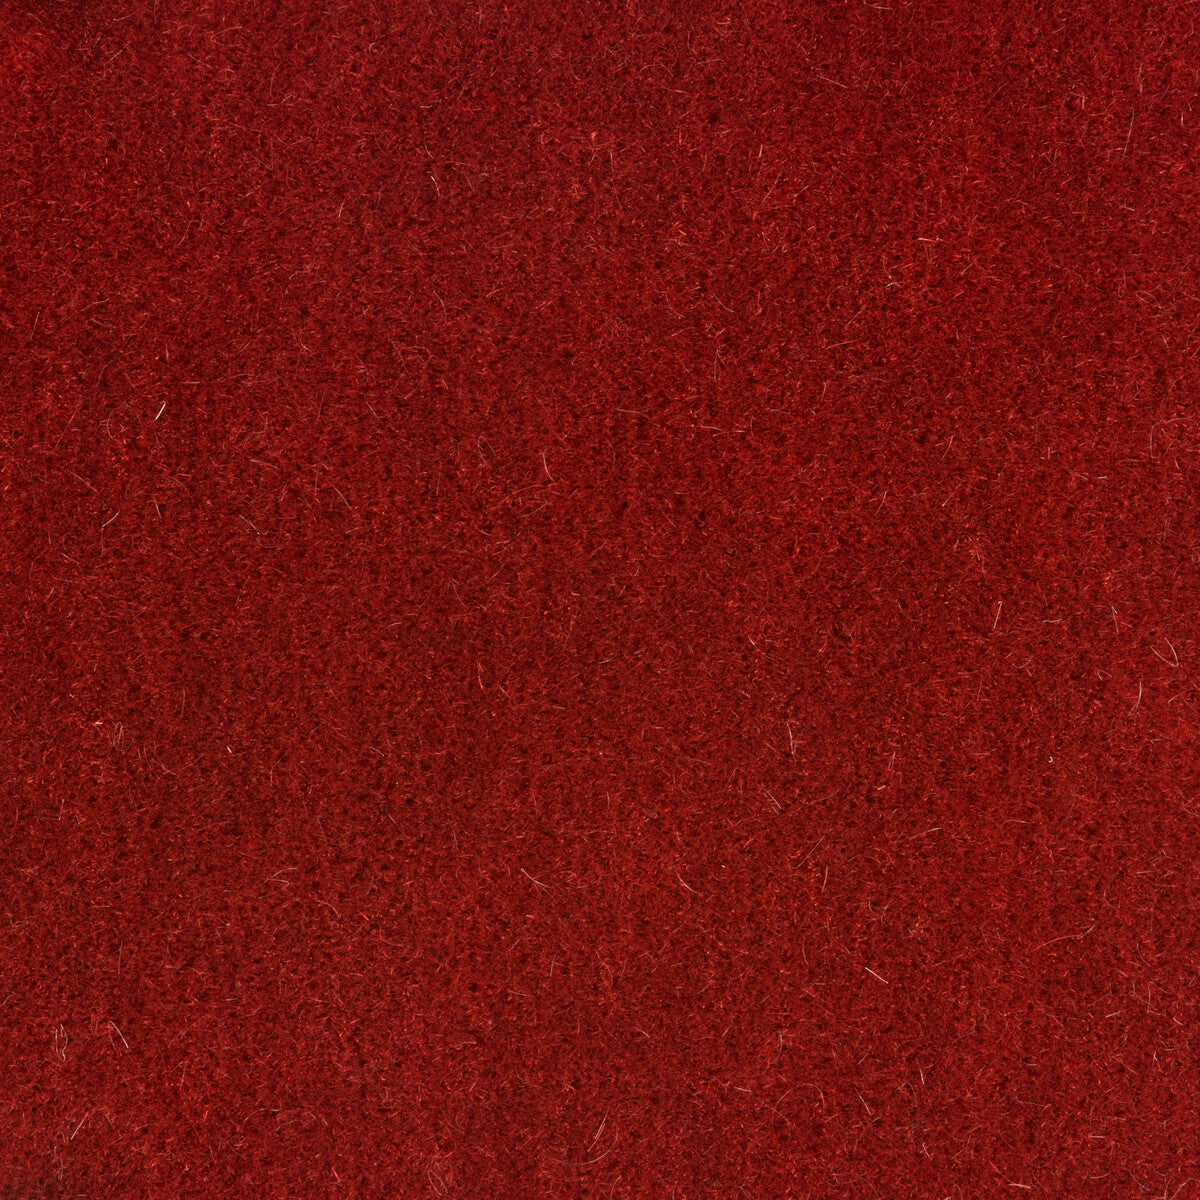 Bachelor Mohair fabric in cinnabar color - pattern 8014101.19.0 - by Brunschwig &amp; Fils